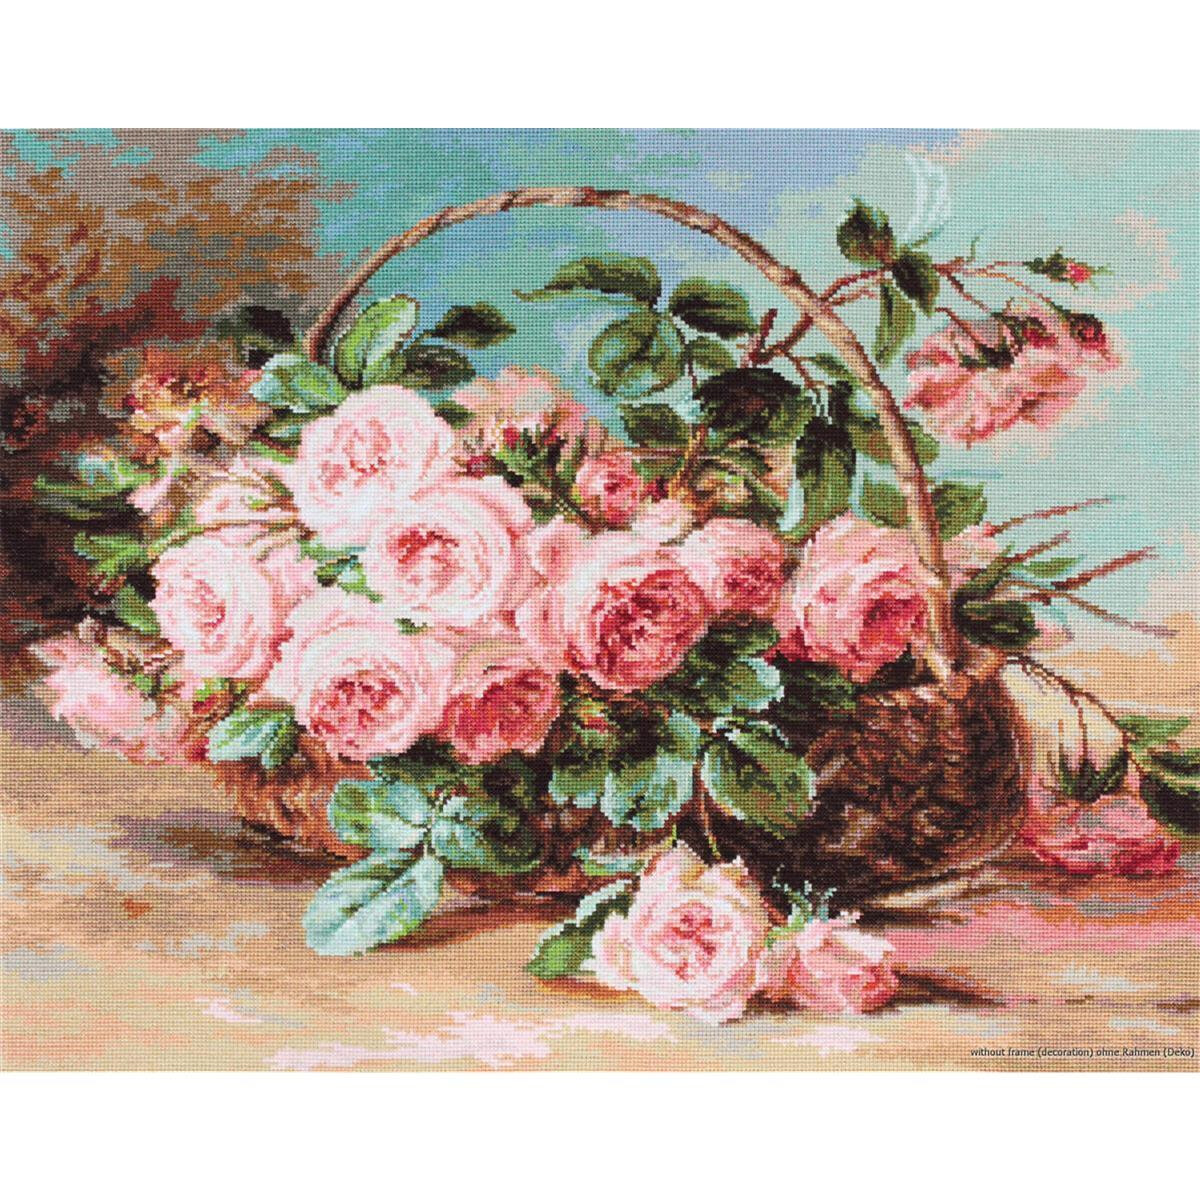 A painting of a wicker basket full of blooming pink...